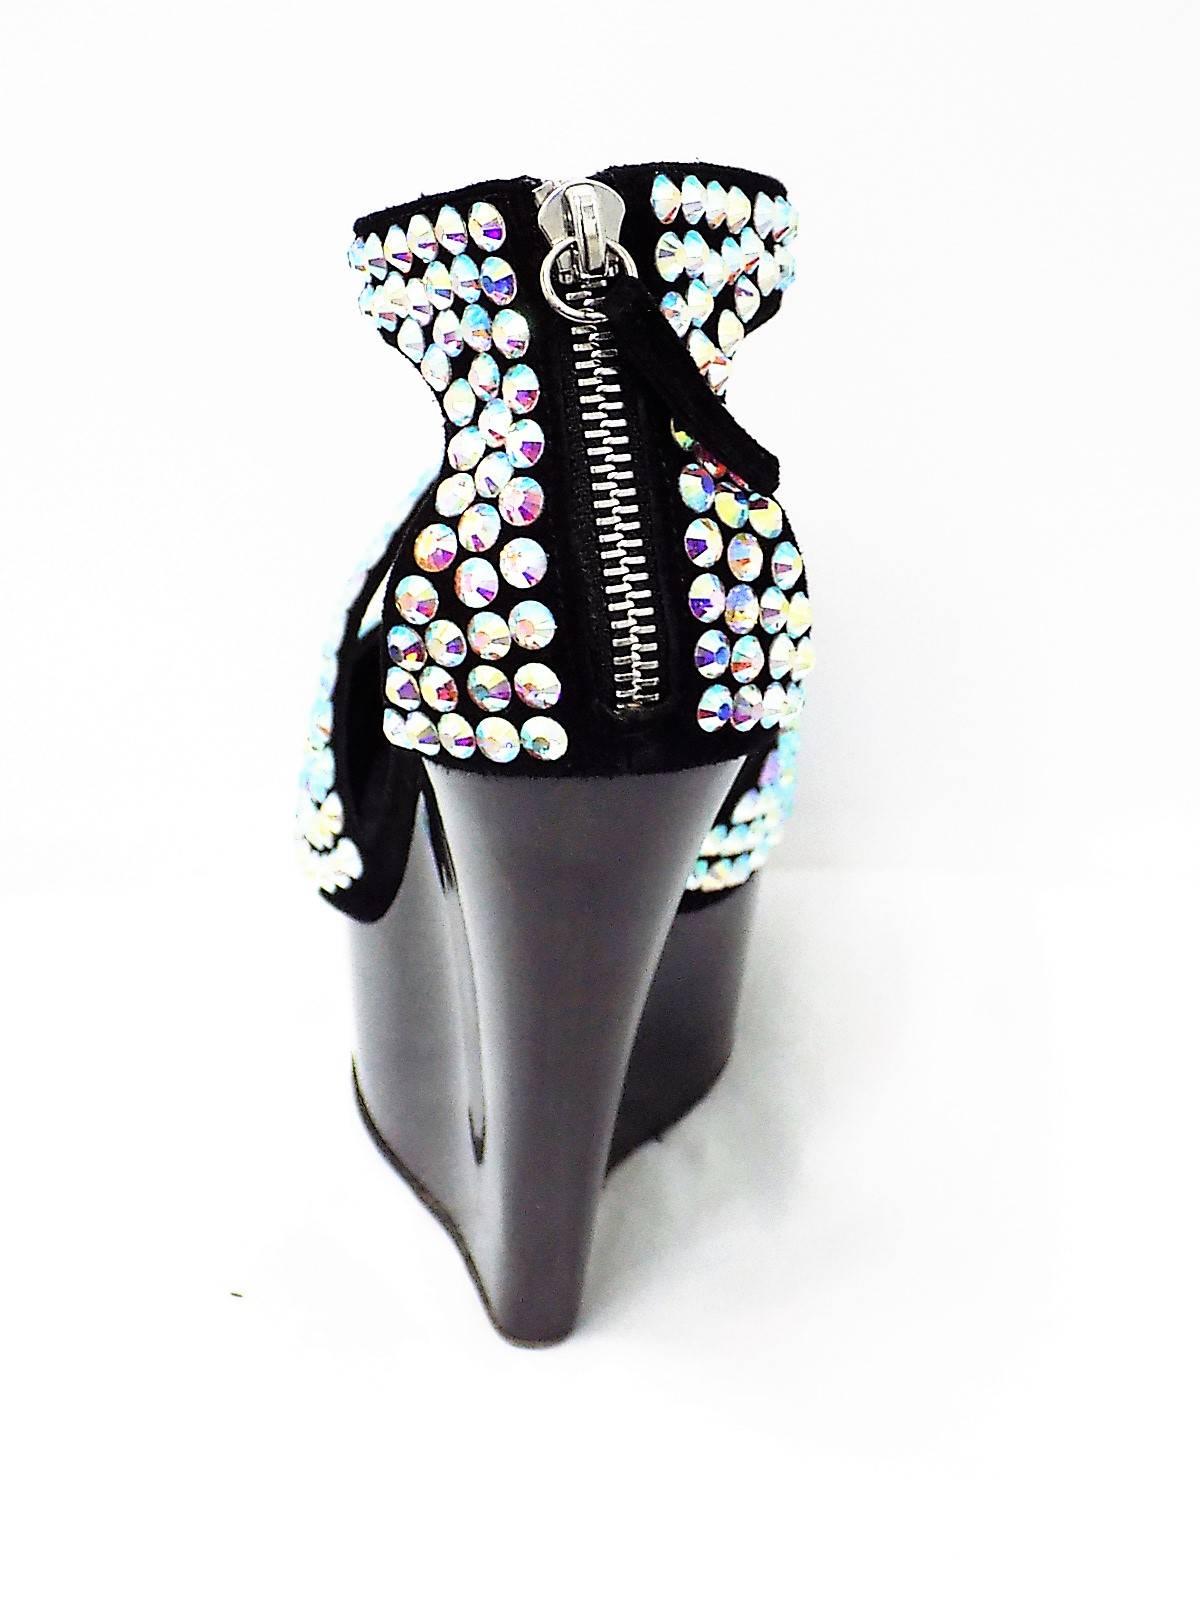 Black Giuseppe Zanotti Limited Edition  Lucite platform wedges w/h large crystals Shoe For Sale